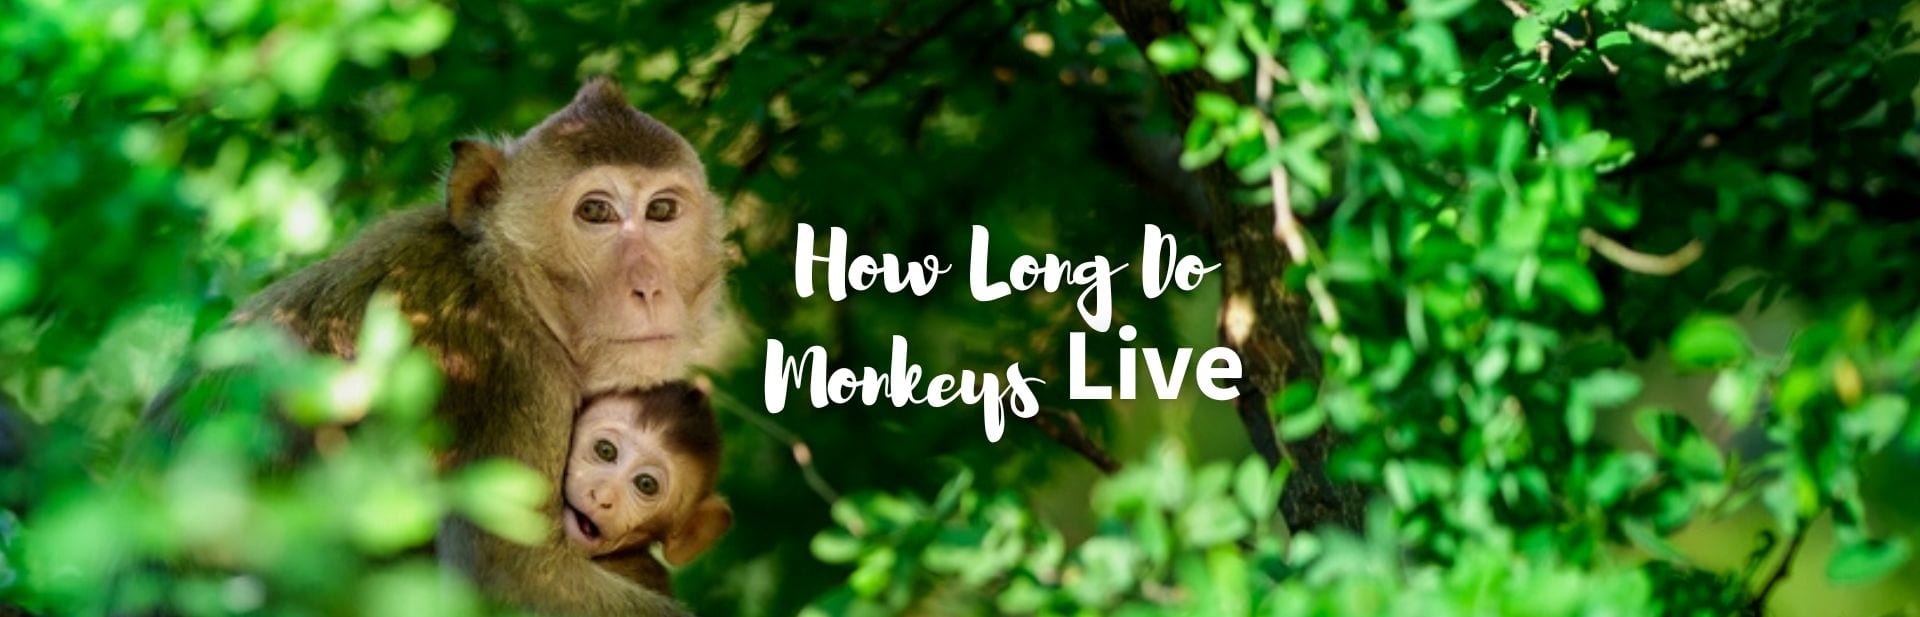 How Long Do Monkeys Live? Exploring the Intriguing Lives of Monkeys and Their Lifespans